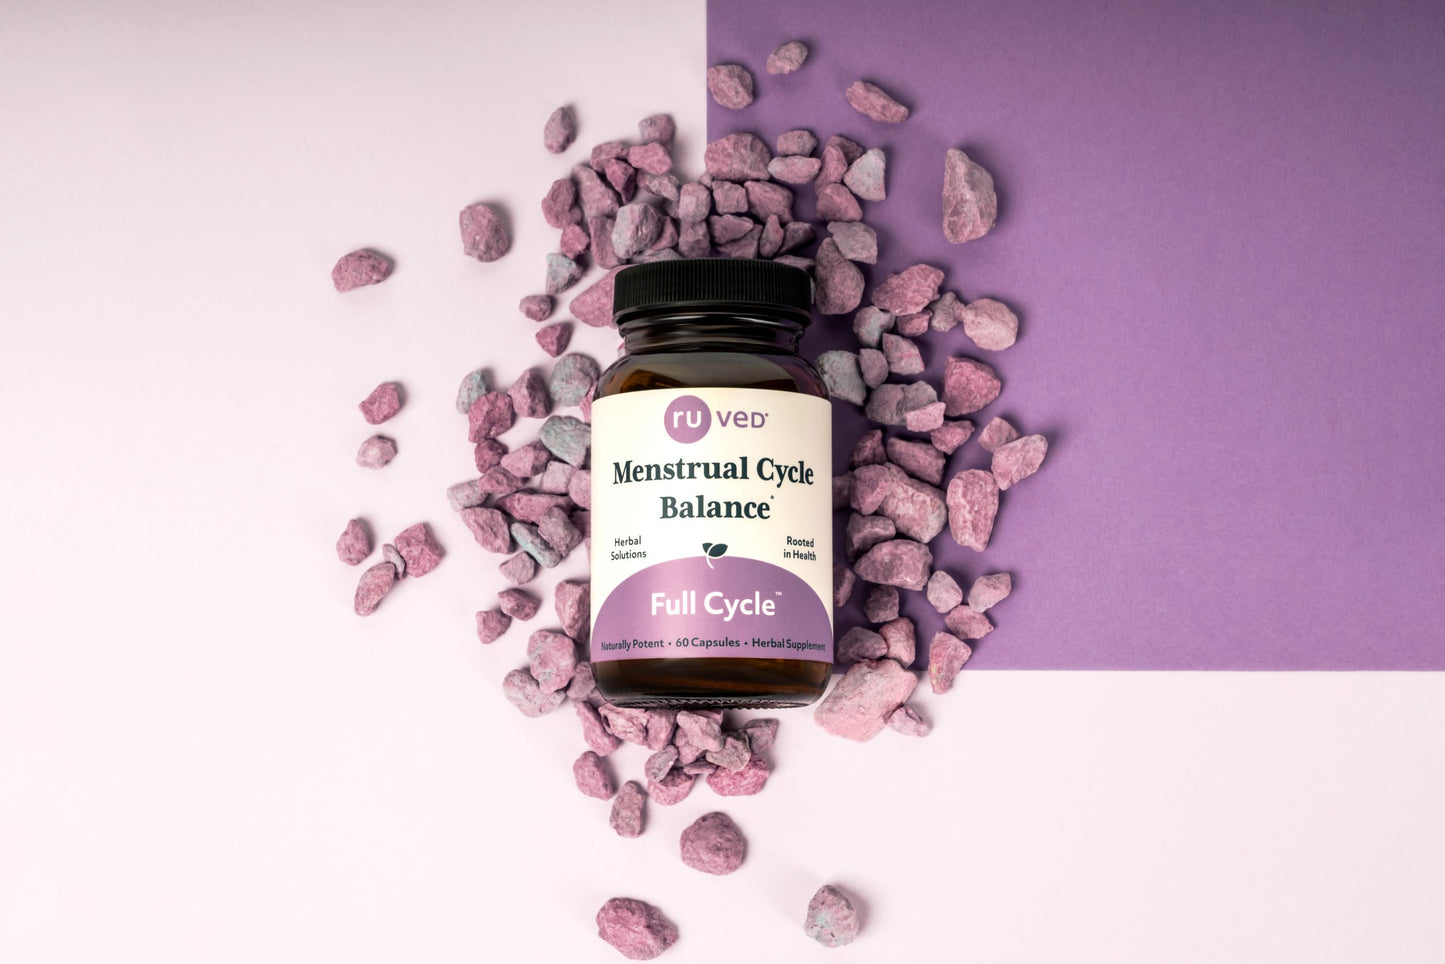 Full Cycle Supplement on Purple Stones - Hormonal Balance Support in a Serene Setting. 